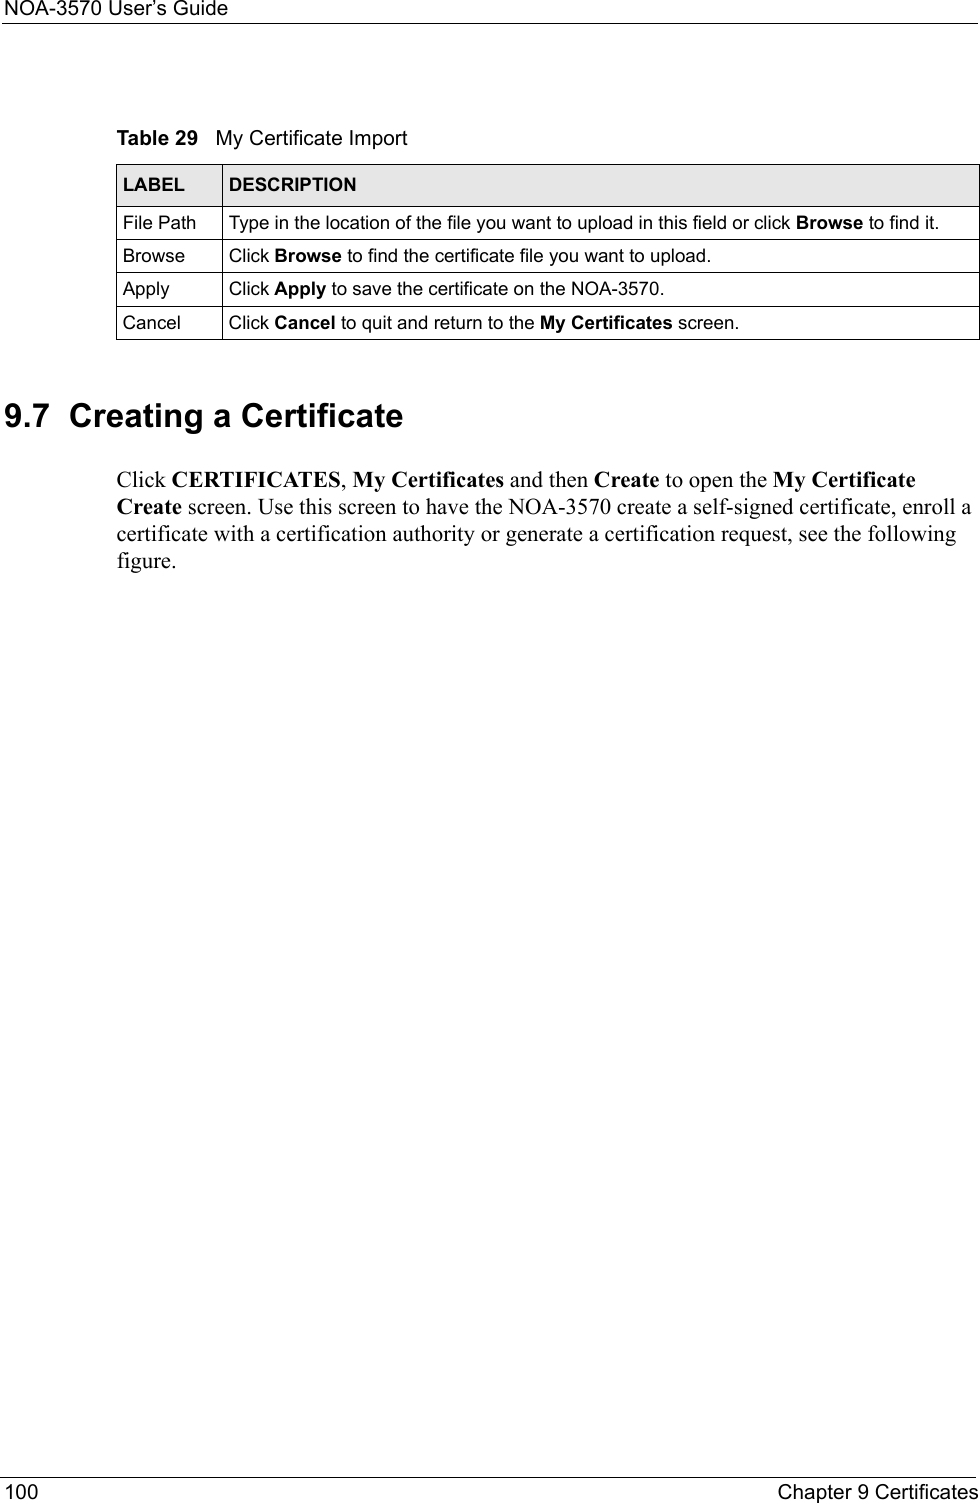 NOA-3570 User’s Guide100 Chapter 9 Certificates9.7  Creating a CertificateClick CERTIFICATES, My Certificates and then Create to open the My Certificate Create screen. Use this screen to have the NOA-3570 create a self-signed certificate, enroll a certificate with a certification authority or generate a certification request, see the following figure.Table 29   My Certificate ImportLABEL DESCRIPTIONFile Path  Type in the location of the file you want to upload in this field or click Browse to find it.Browse Click Browse to find the certificate file you want to upload. Apply Click Apply to save the certificate on the NOA-3570.Cancel Click Cancel to quit and return to the My Certificates screen.